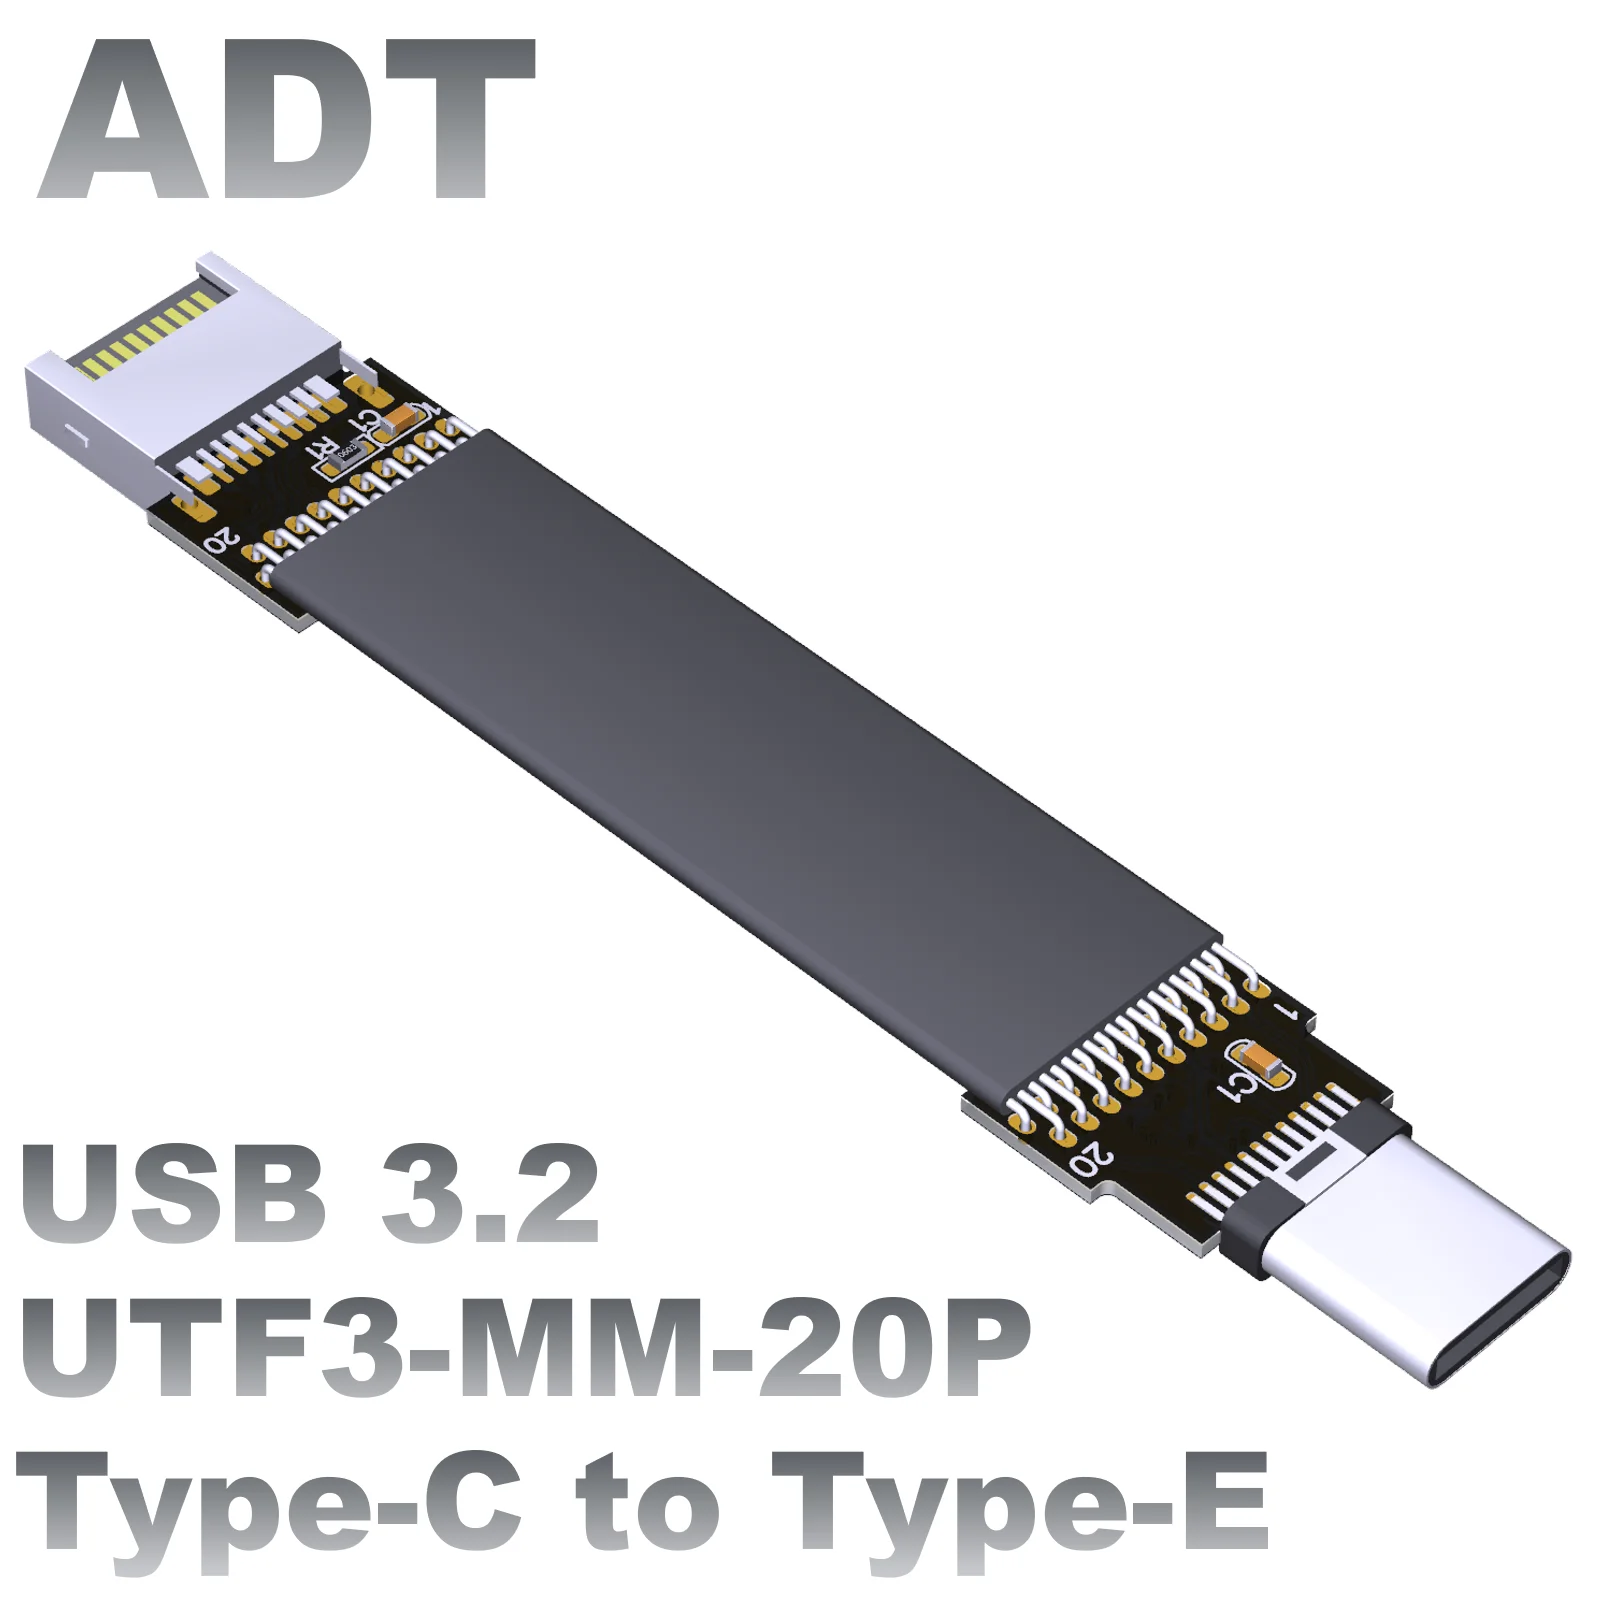 60cm/80cm USB 3.1 Front Panel Header Type-E To Usb-C Type C Female Connector Extension Wire Cable TYPE E To TYPE C Convert Cable